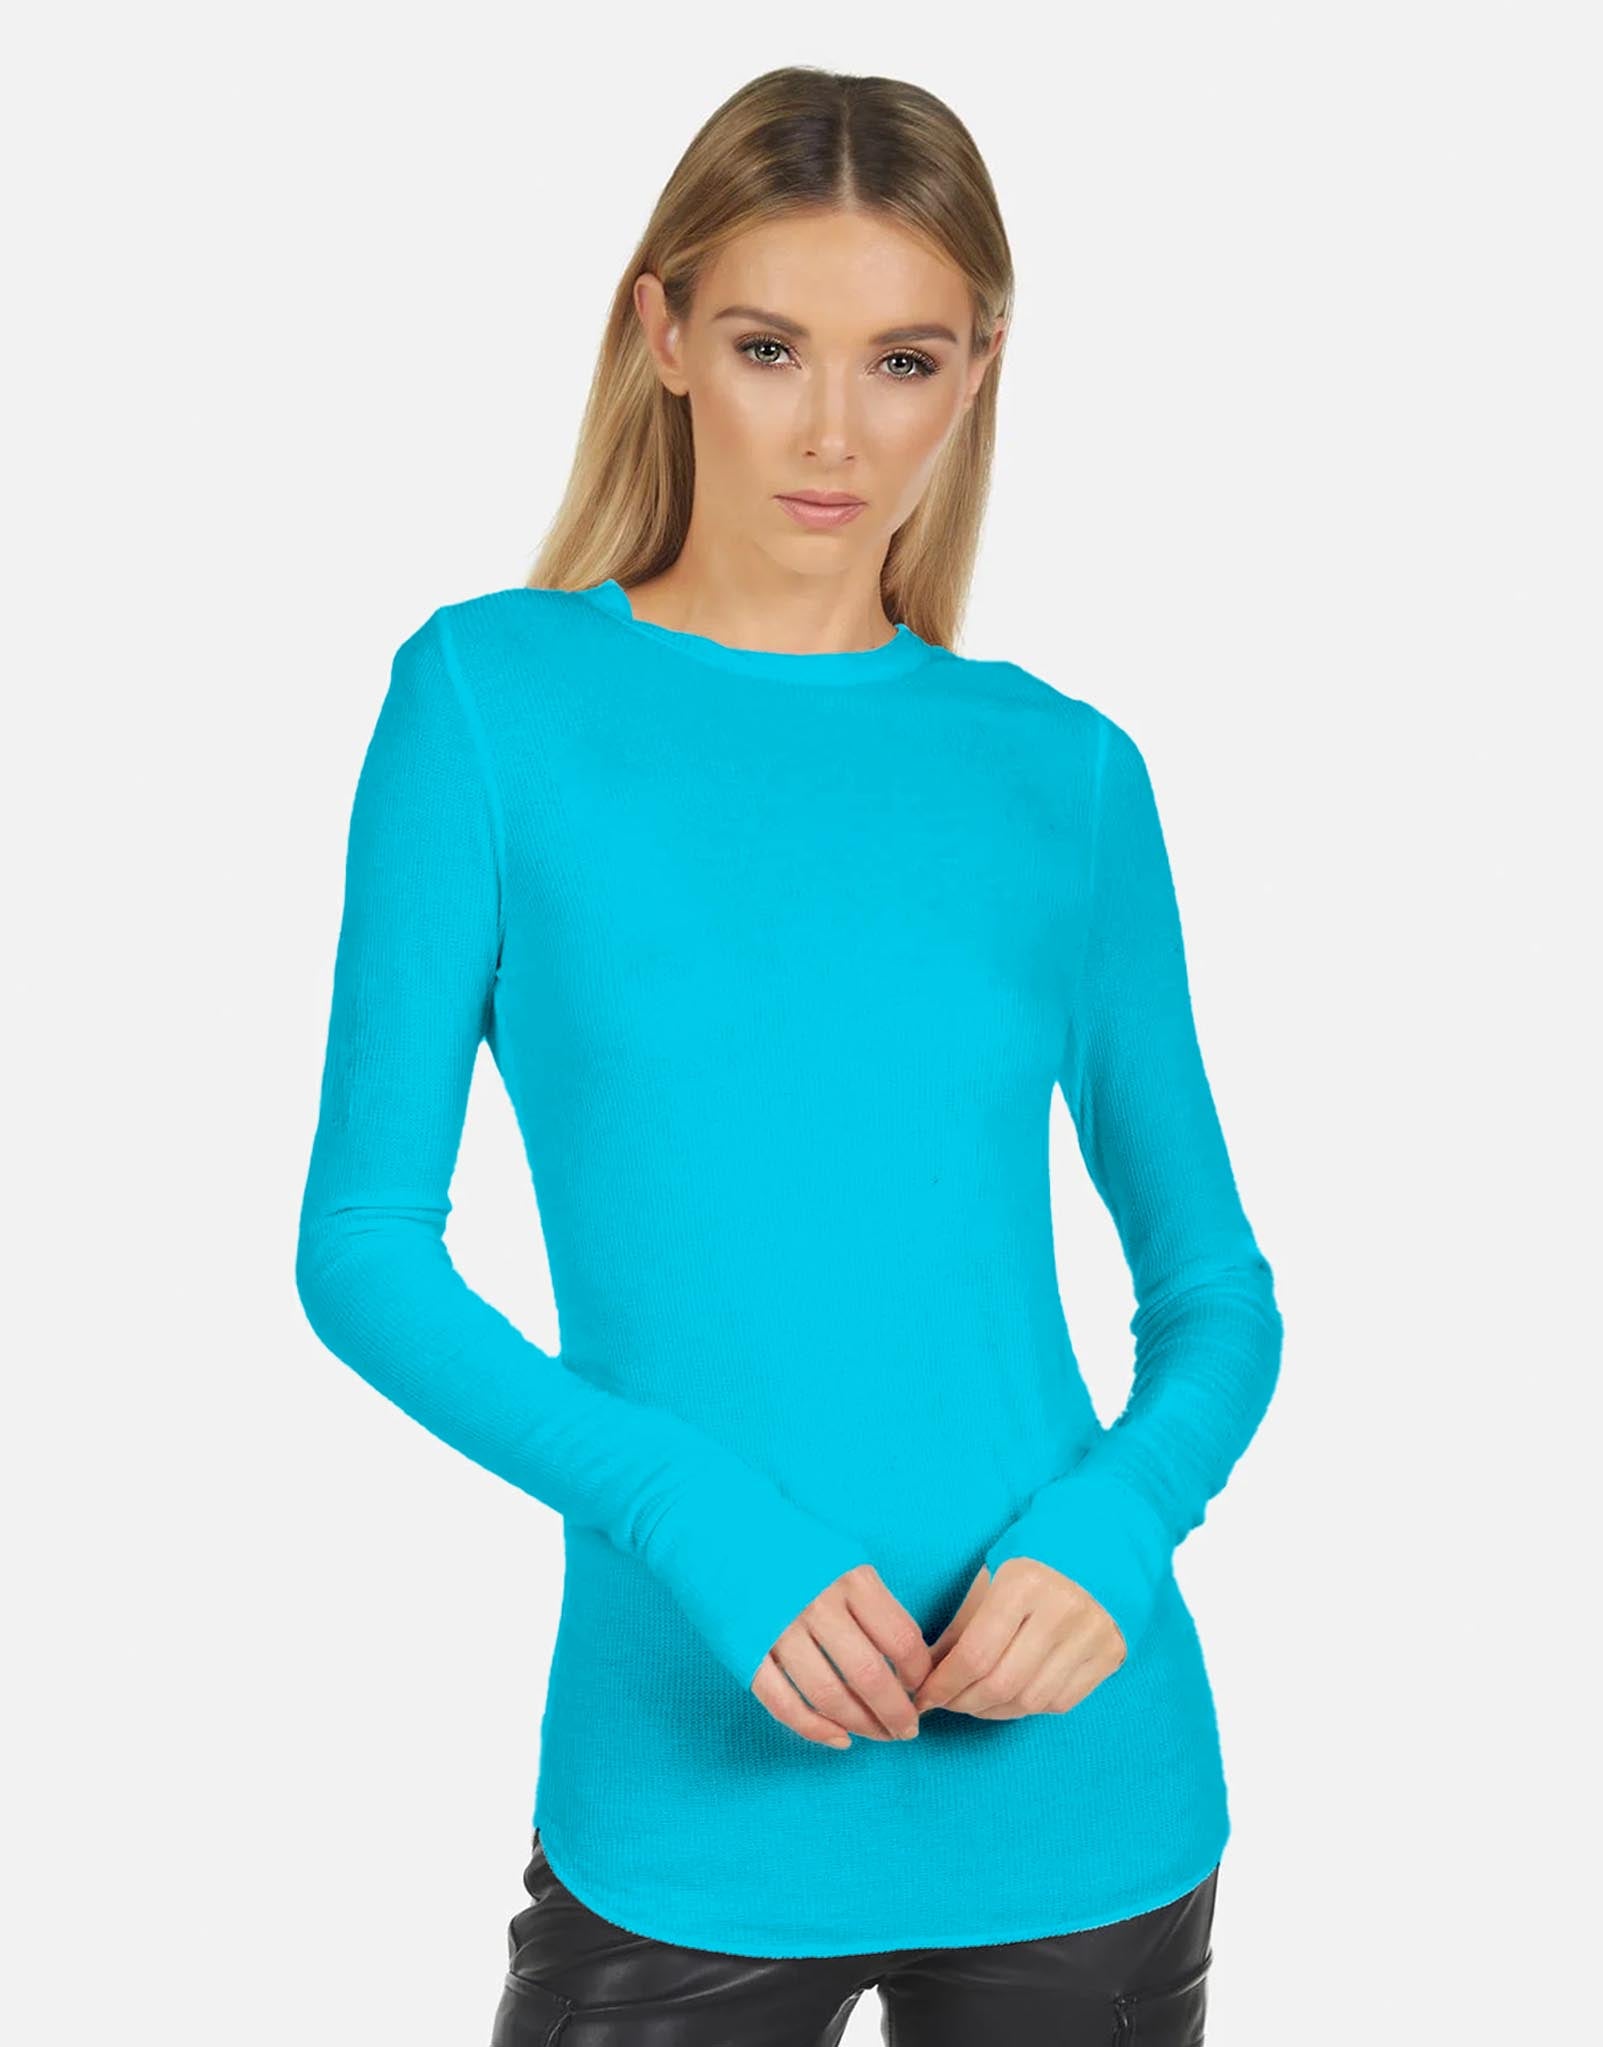 Women's L/S Fitted Top in Turquoise Stone | Alick by Michael Lauren